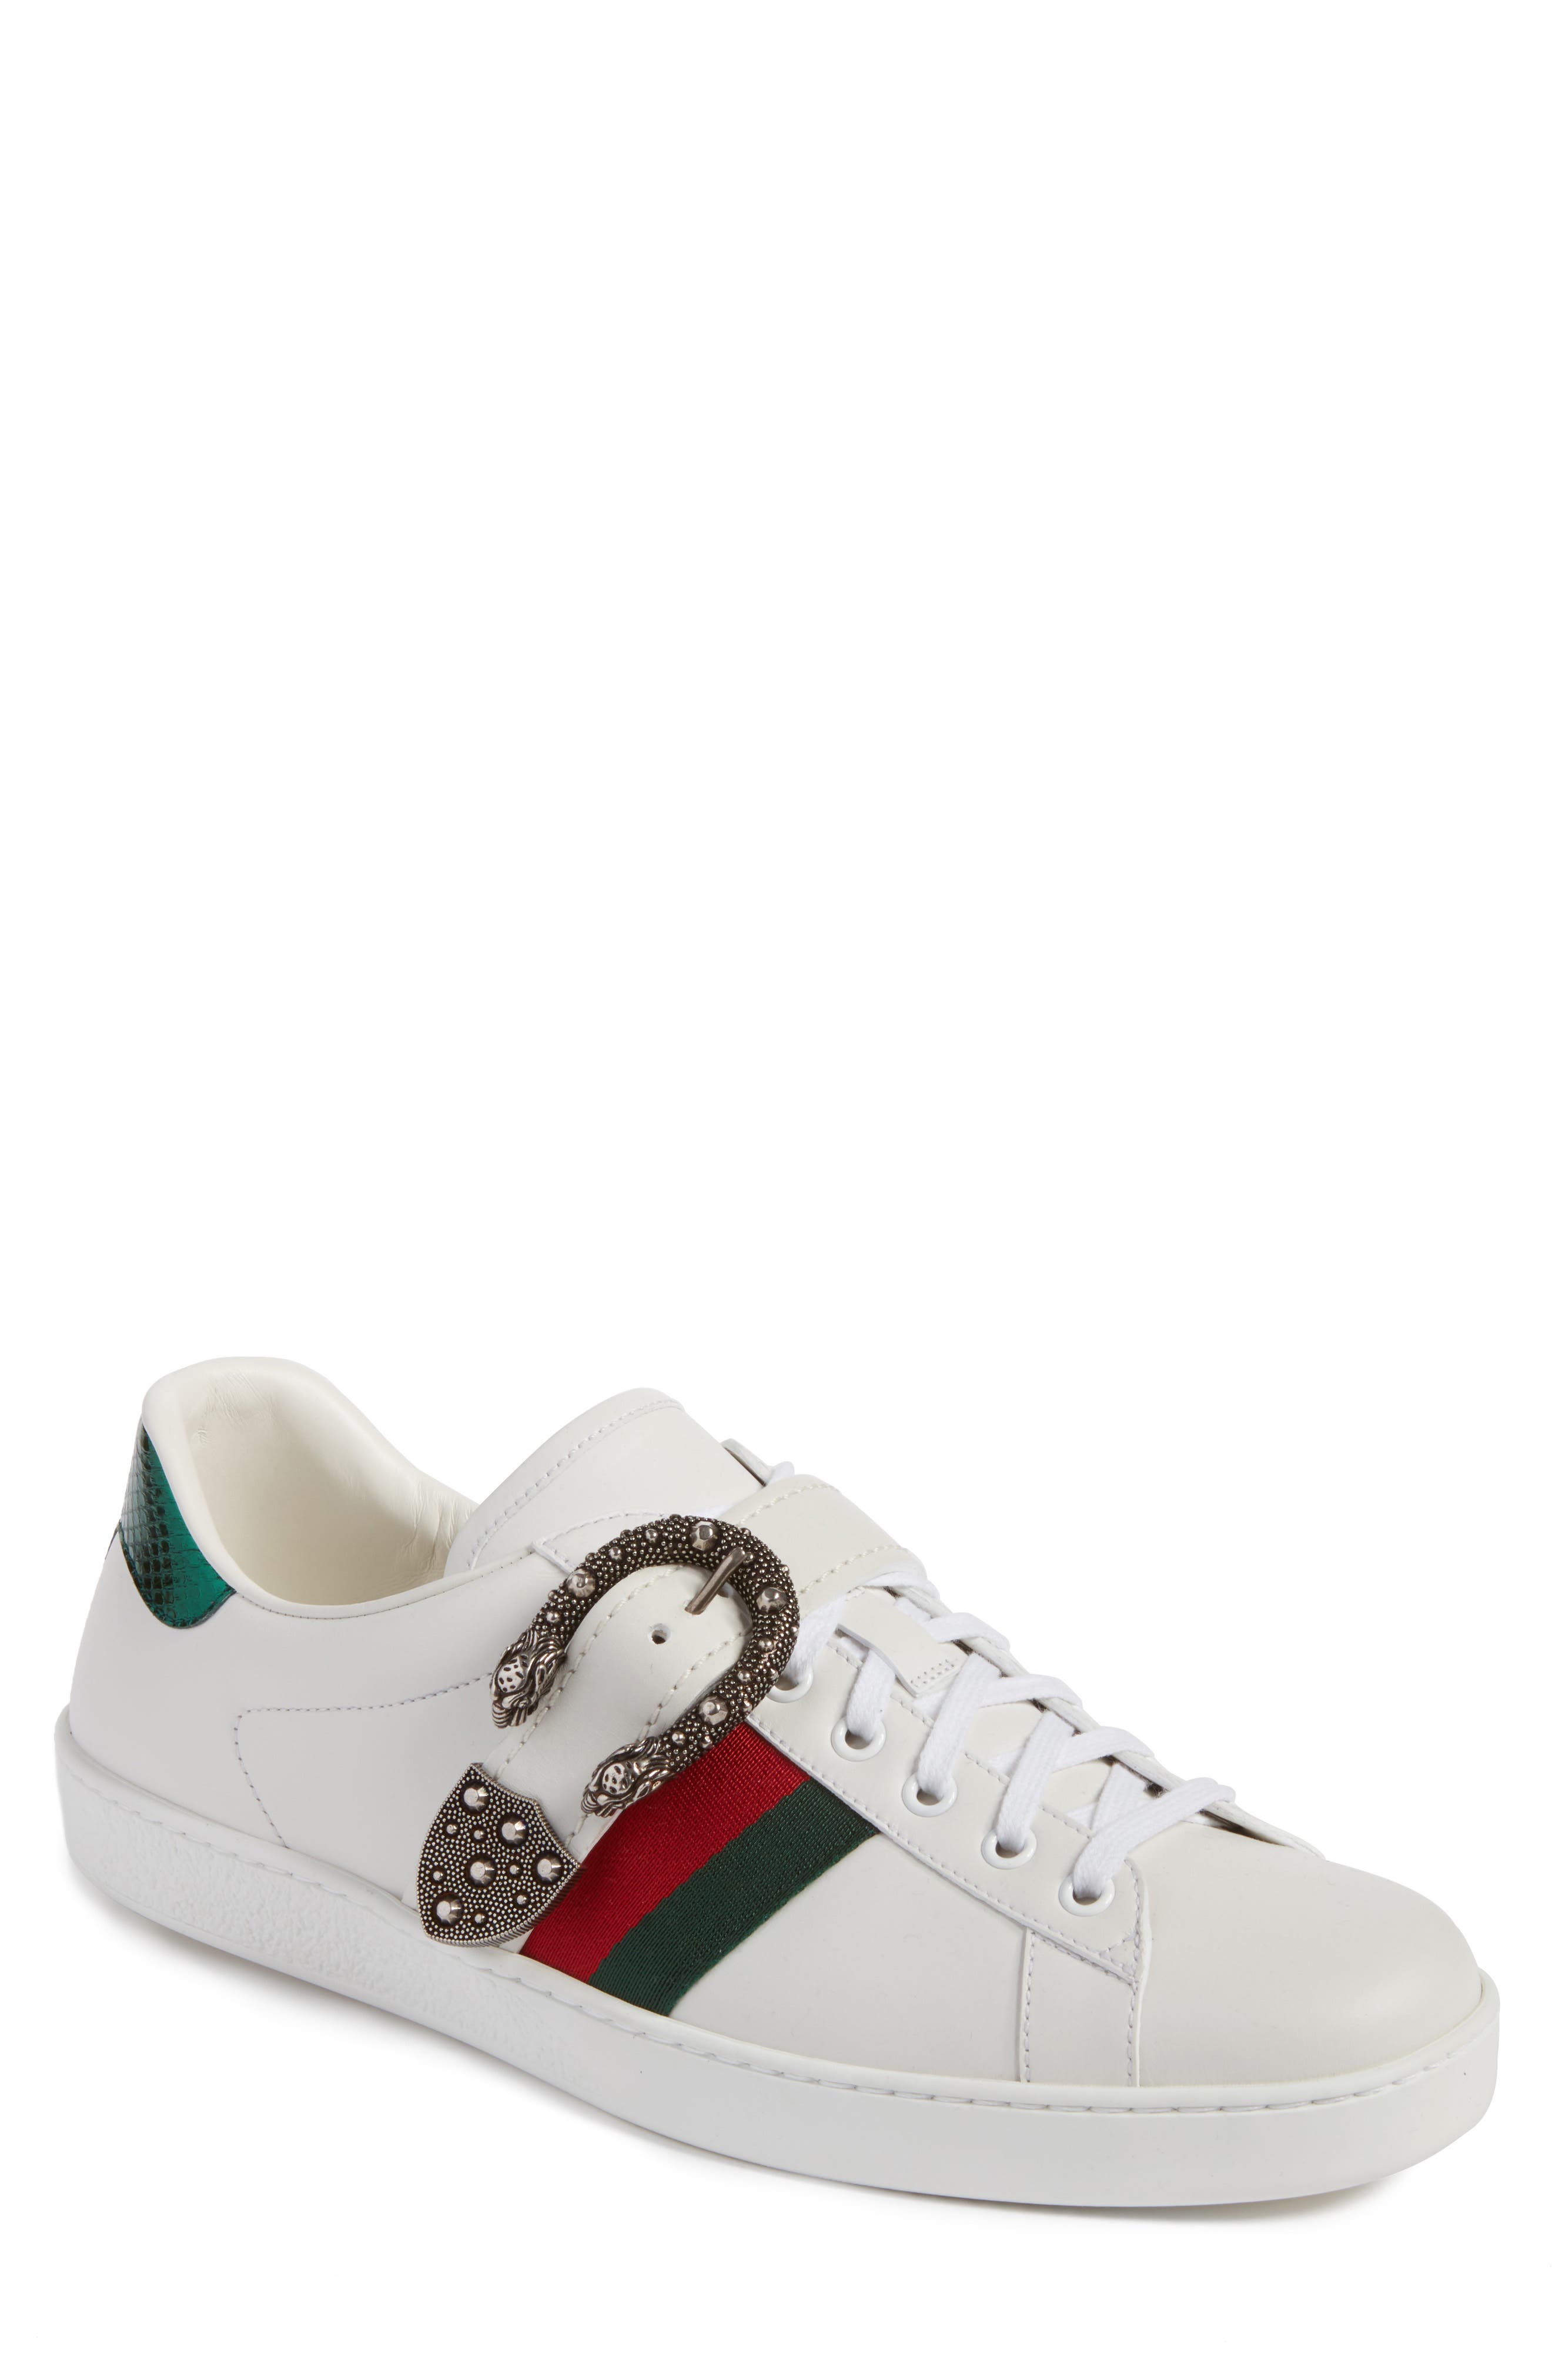 gucci shoes with buckle